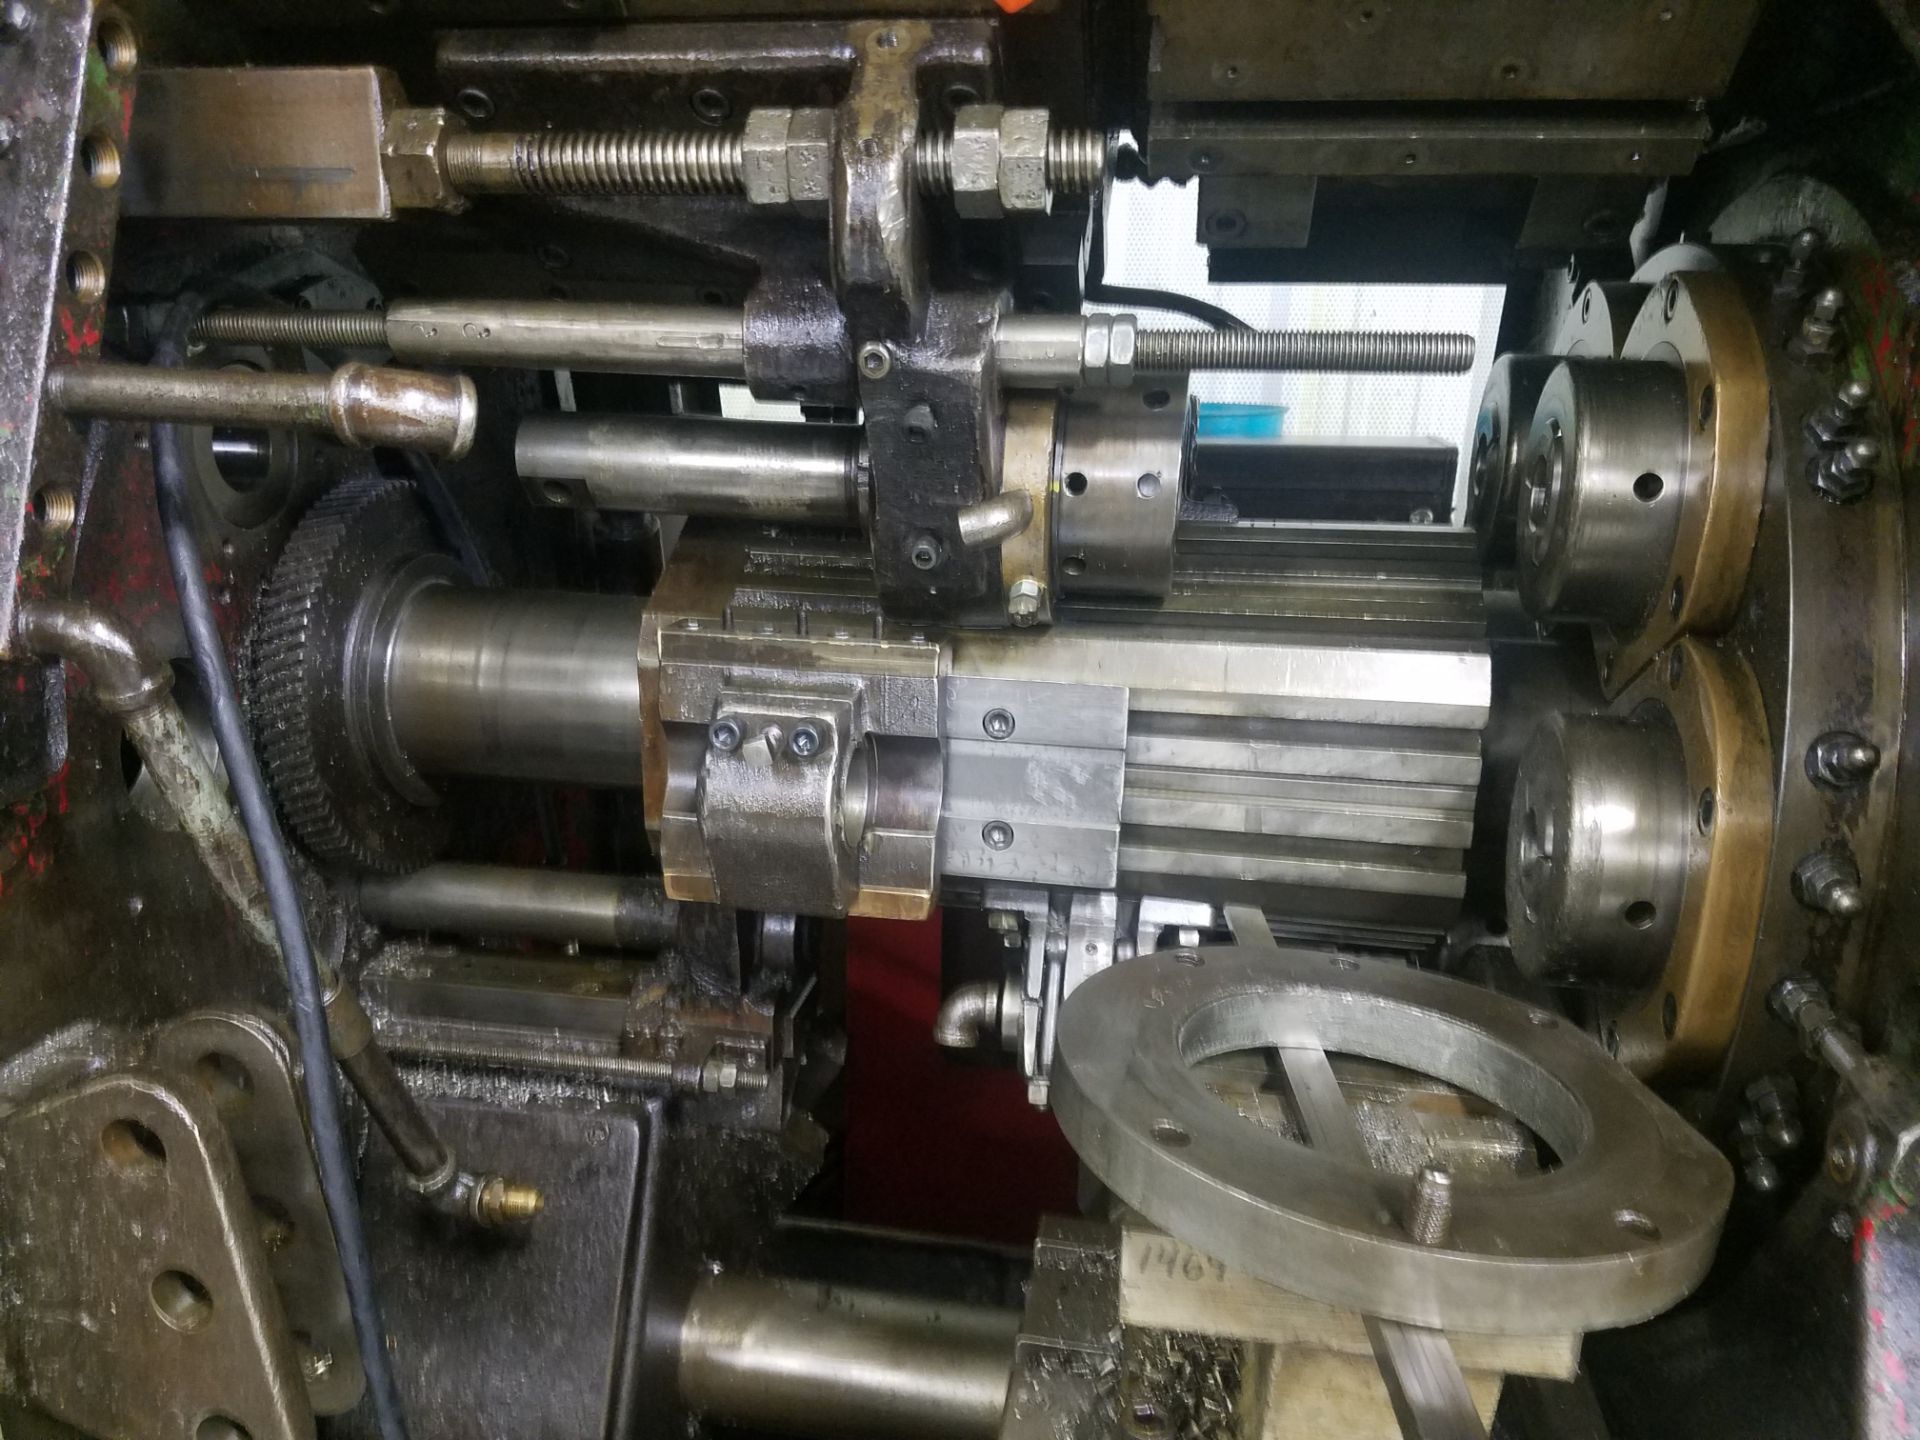 Acme Gridley RB6 Automatic Screw Machine, s/n 41397, 1 5/8 In., Chucker, 6 Spindle, Loading Fee - Image 2 of 3